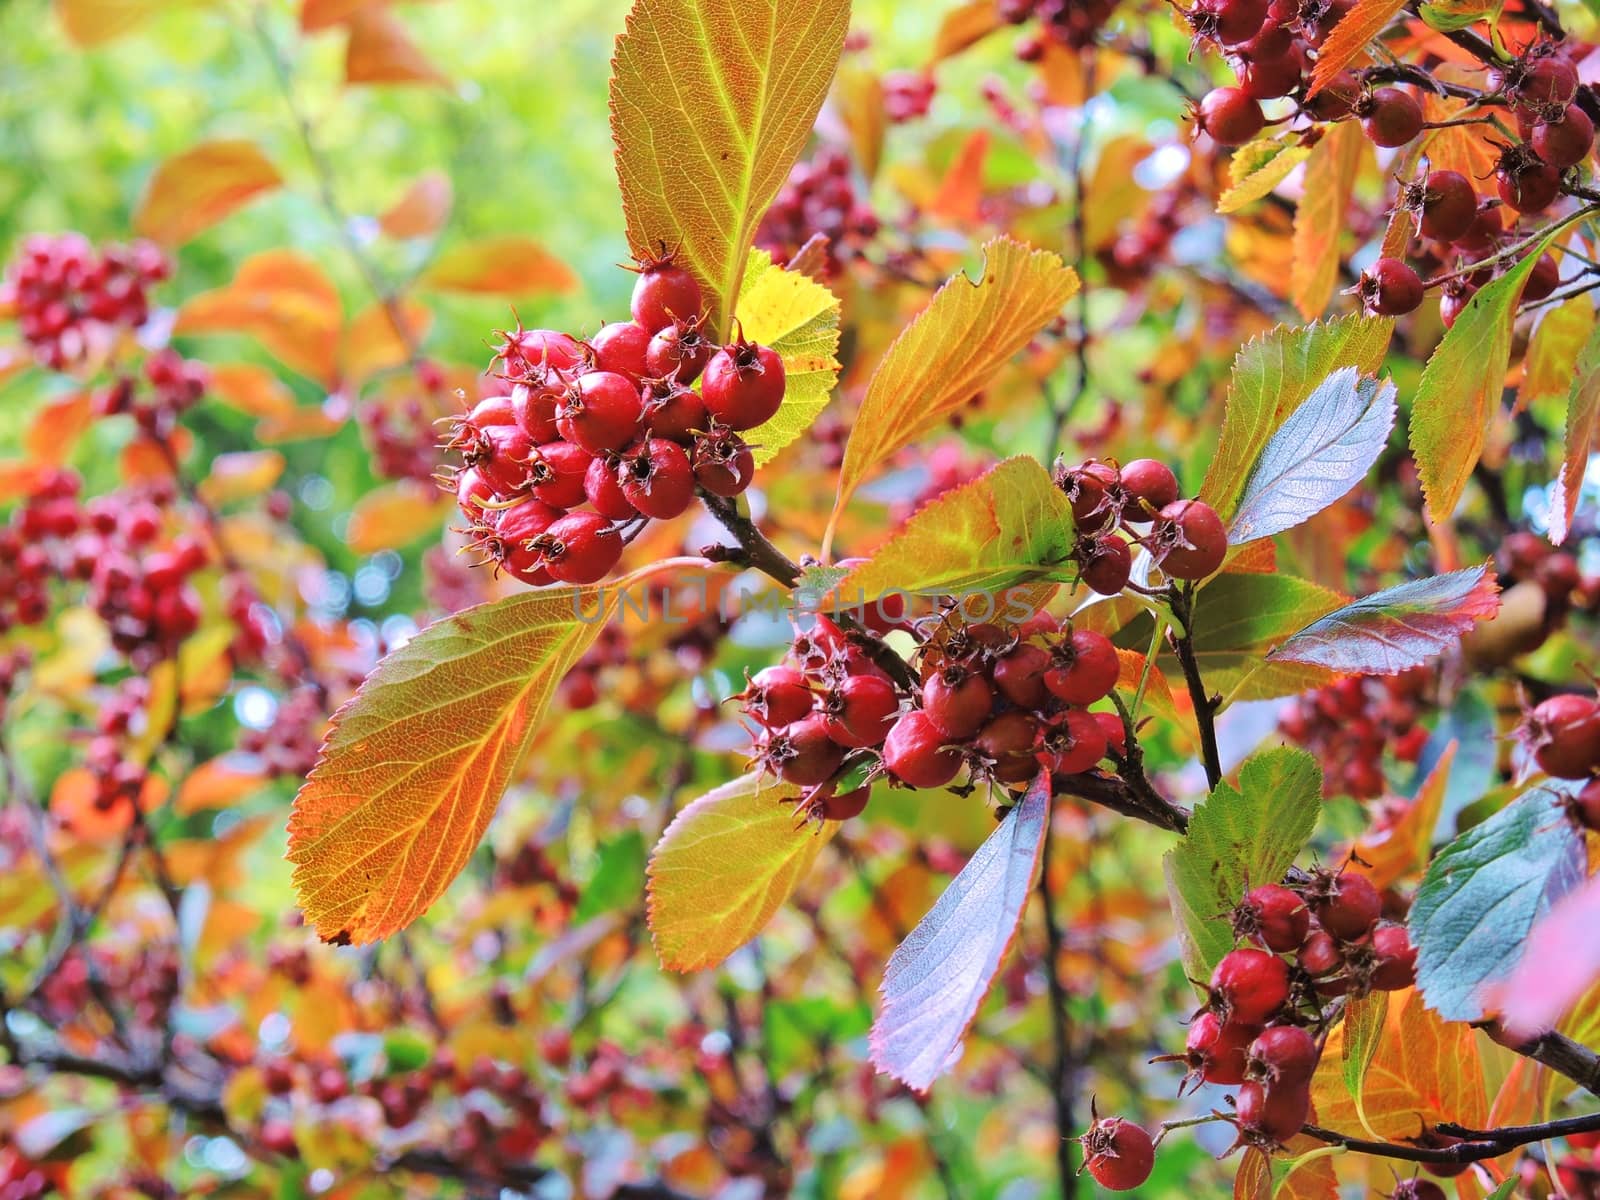 Colourful Autumn leaves and berries. by paulst